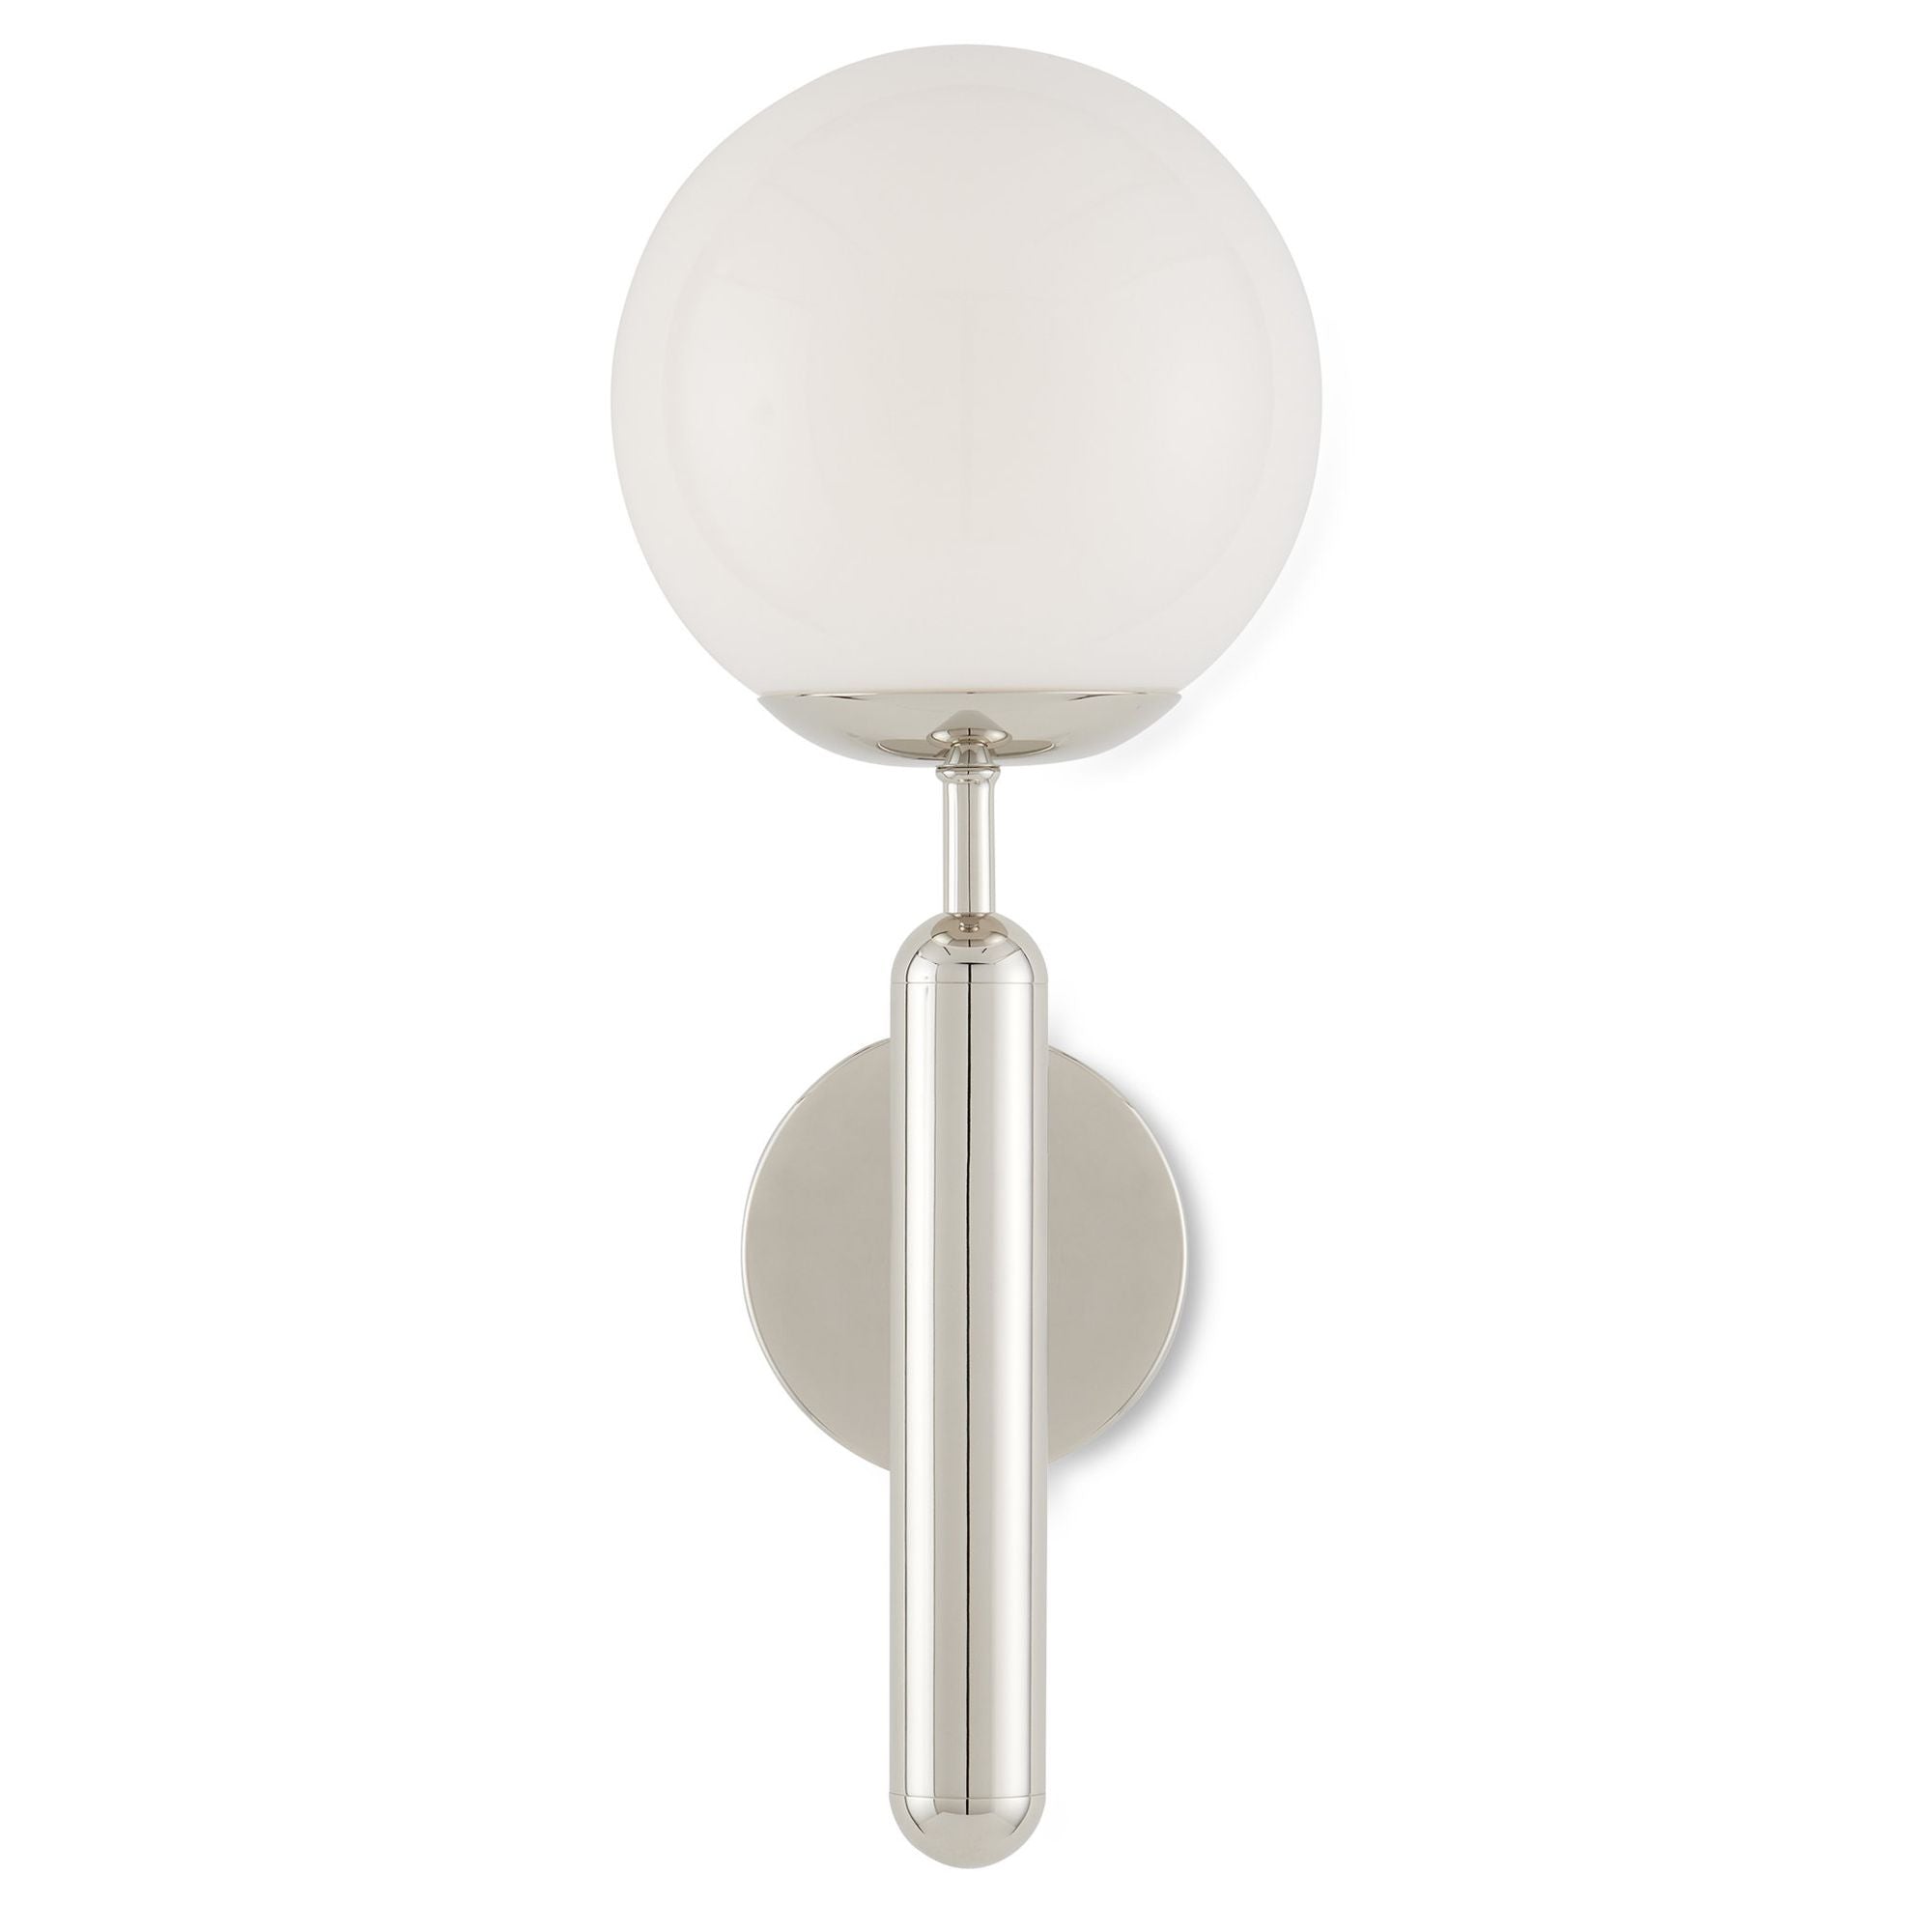 Barbican Single-Light Nickel Wall Sconce - Polished Nickel/White